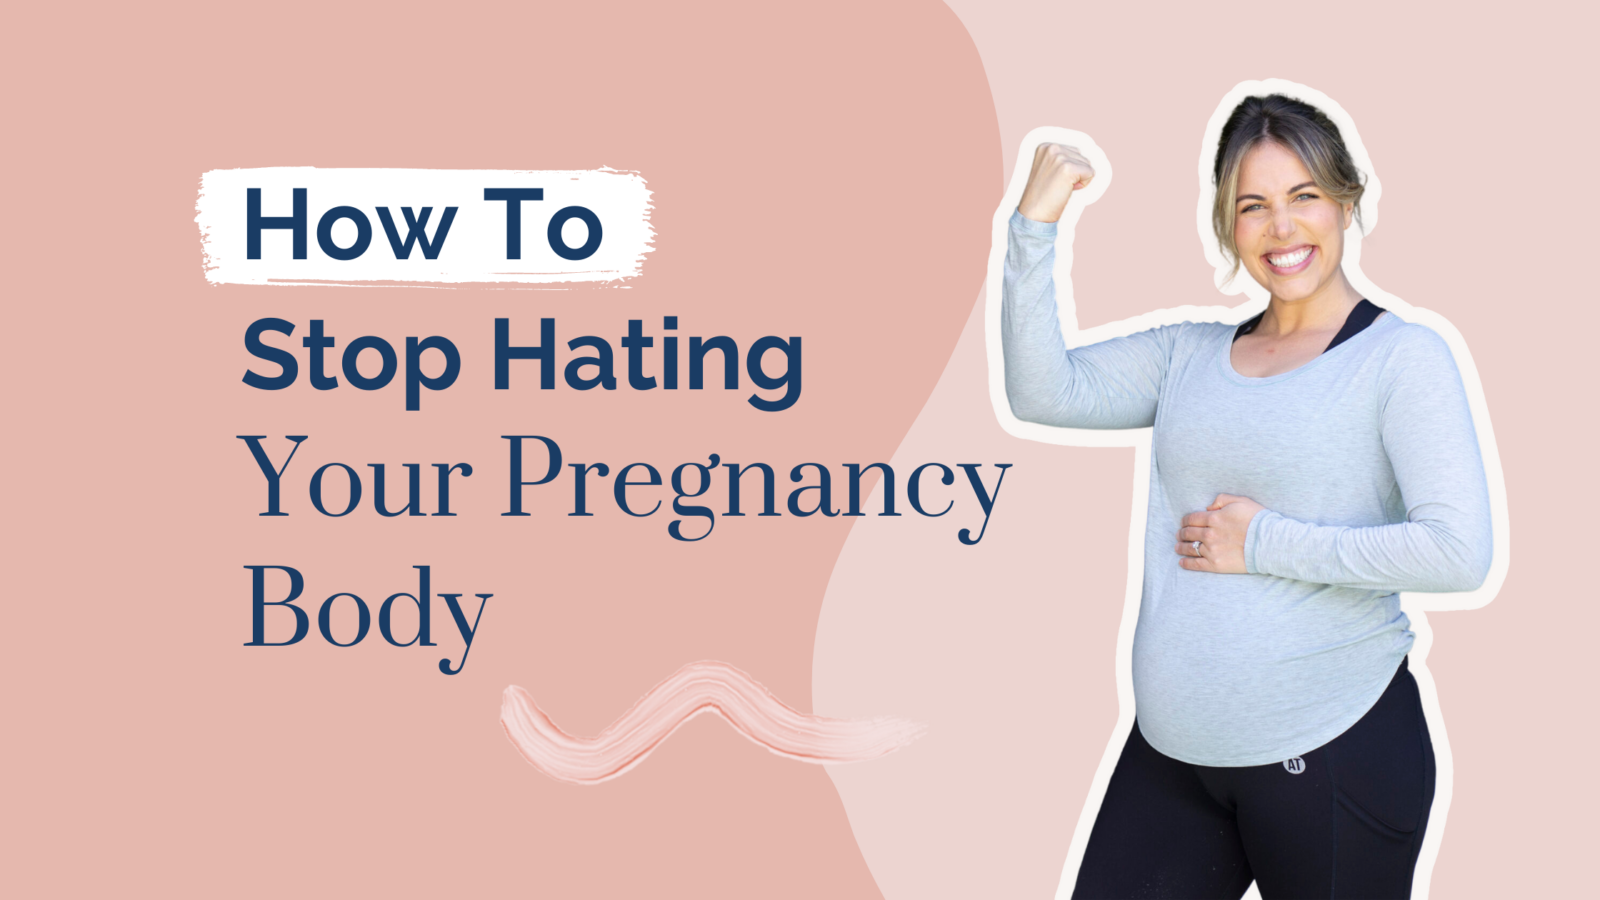 Hate Being Pregnant 8 Ways To Improve Your Body Image 